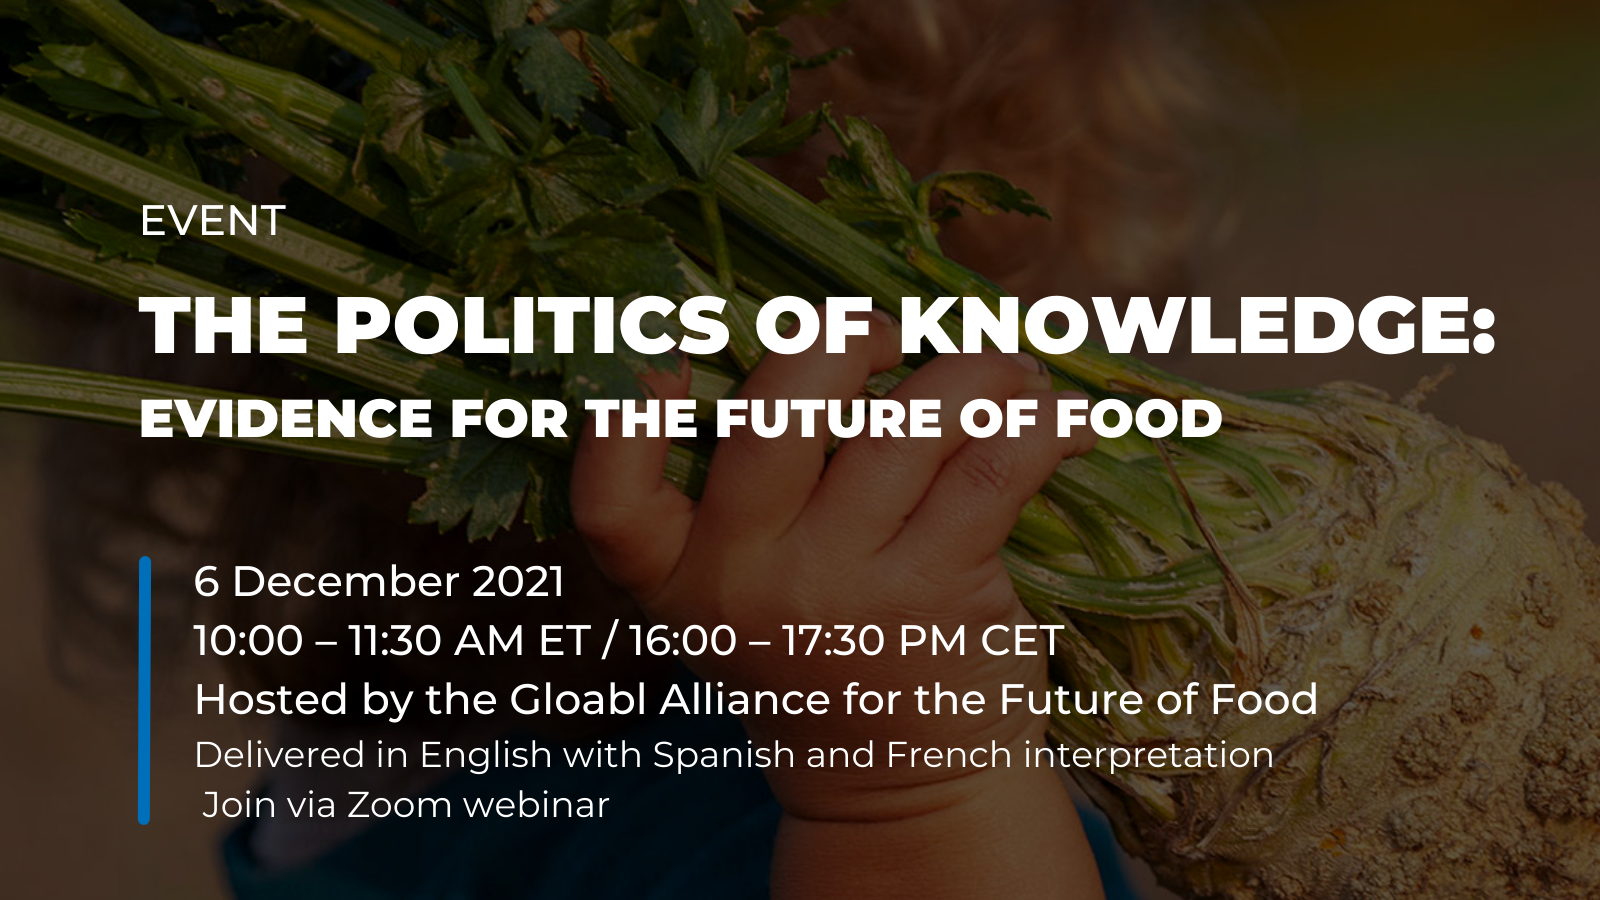 Join the webinar organised by the Global Alliance for the Future of Food on the 6th of December at 16:00-17:30 CET(10:00-11:30 ET)!